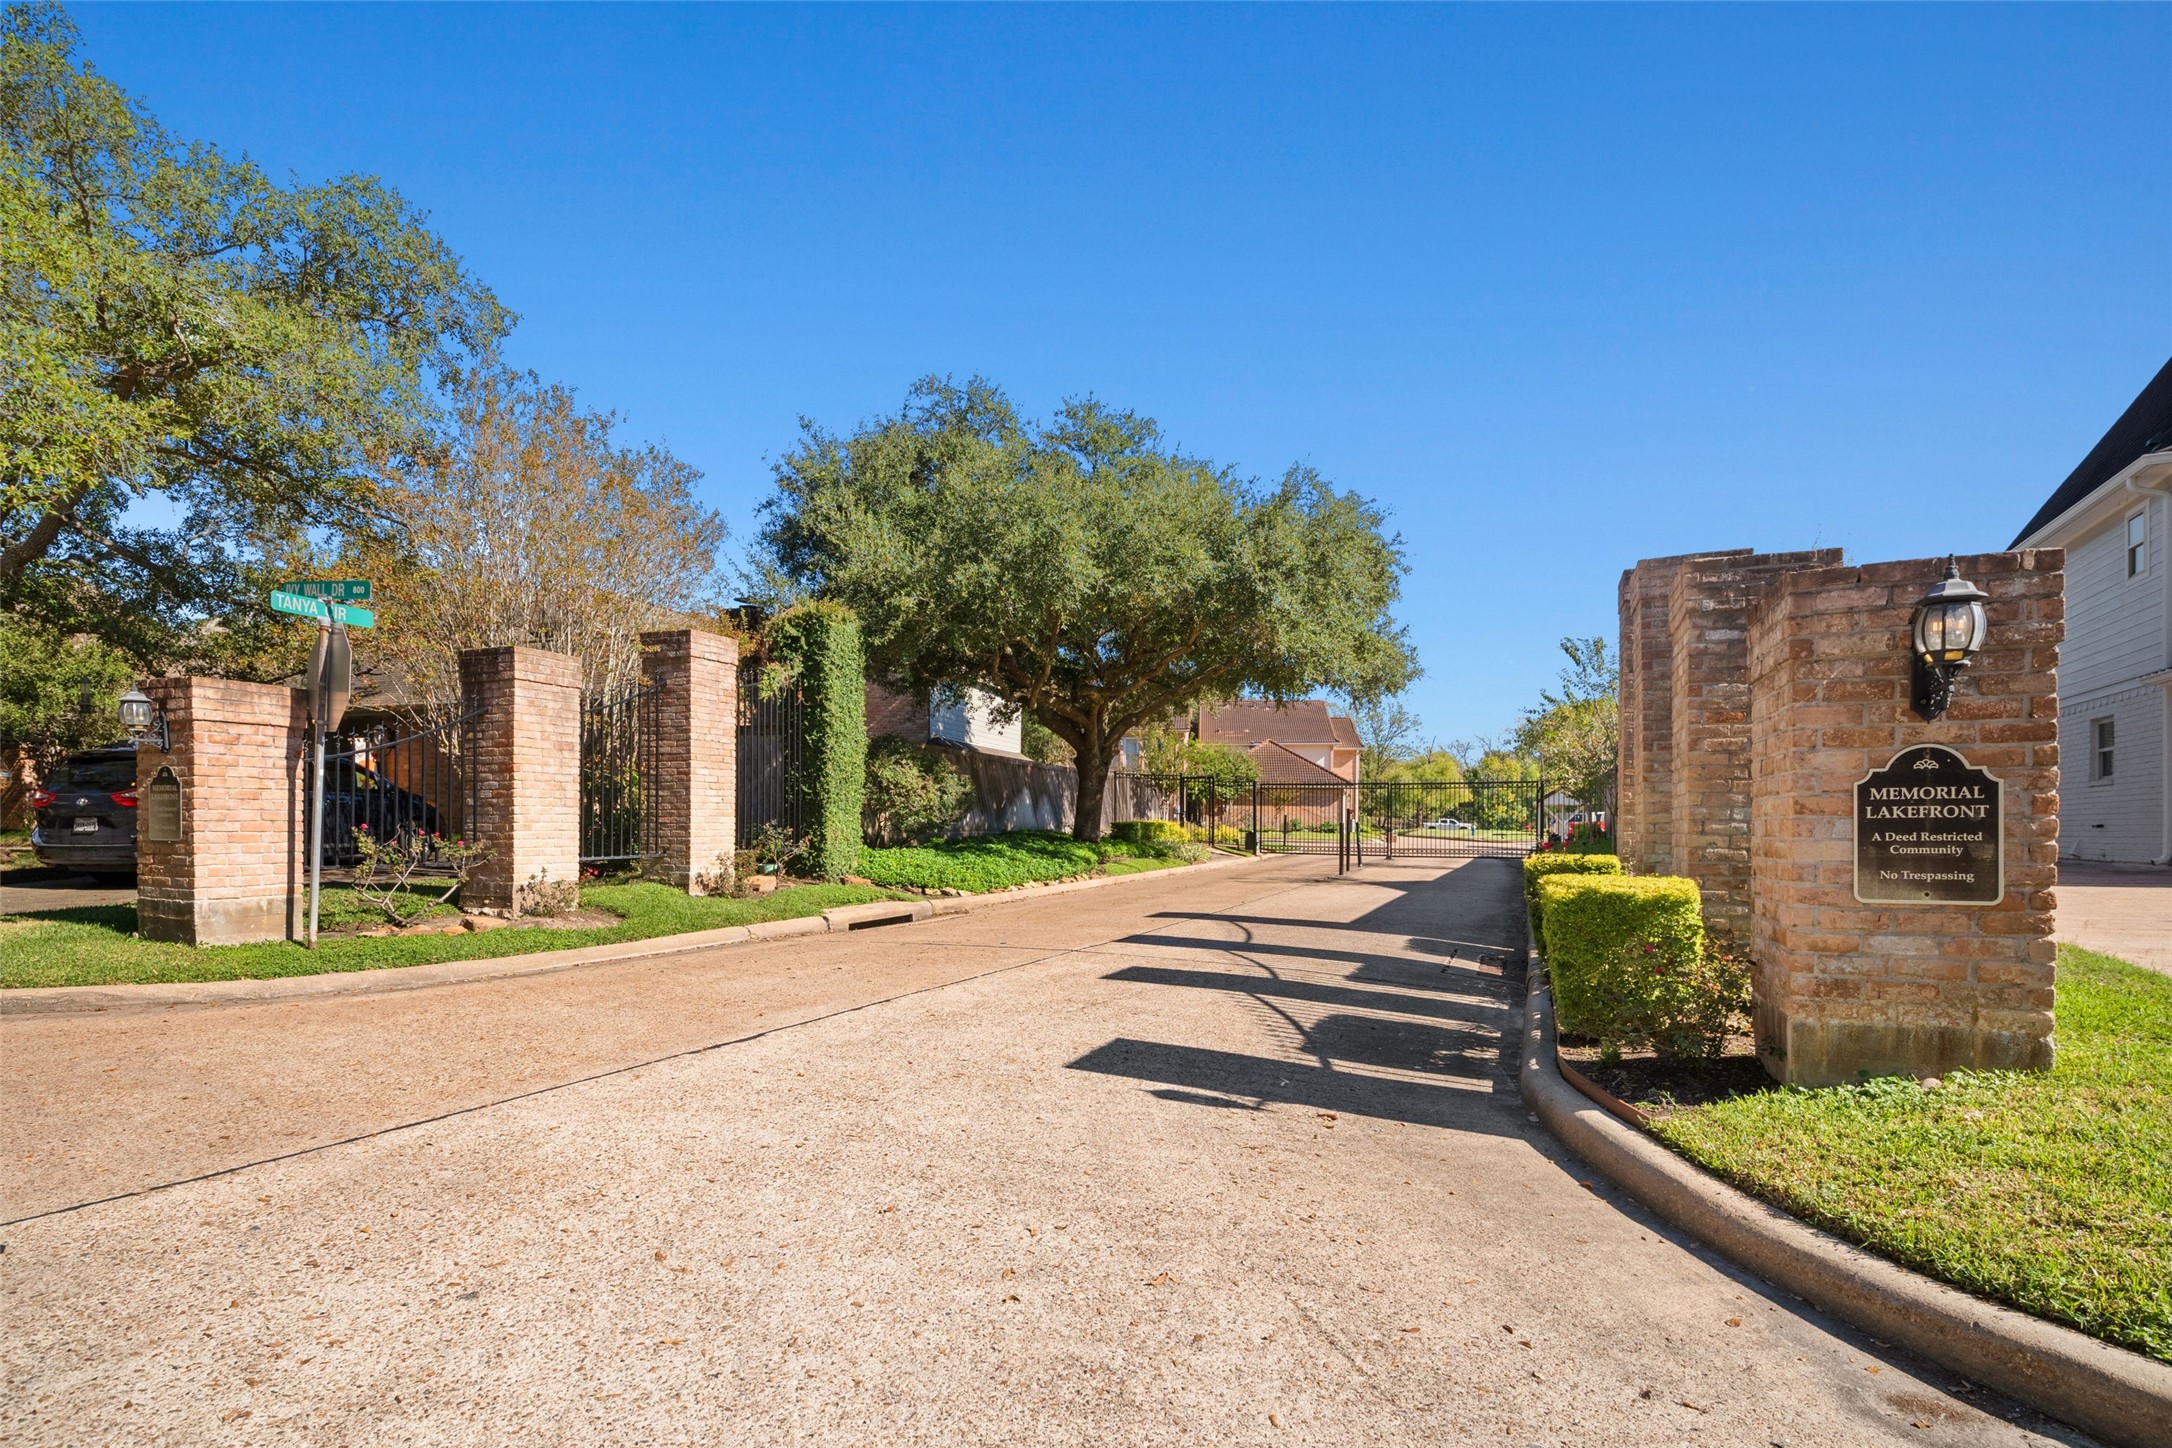 Residents will enjoy the peace of mind that comes from living in a secure gated community and well-maintained common areas.